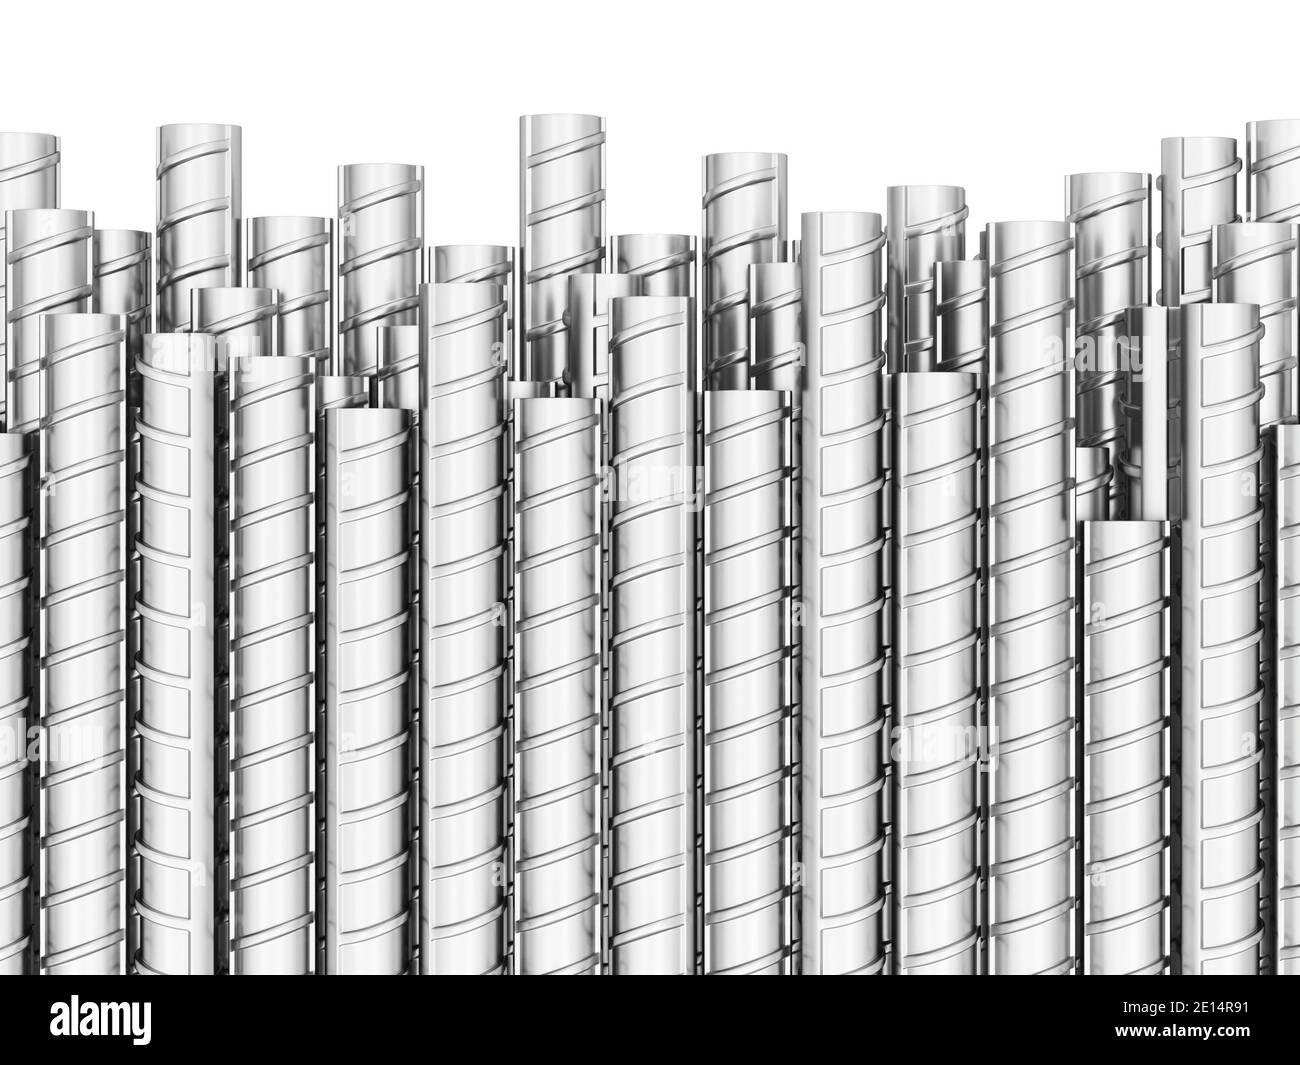 Steel reinforced bars. 3d illustration isolated on white background Stock Photo